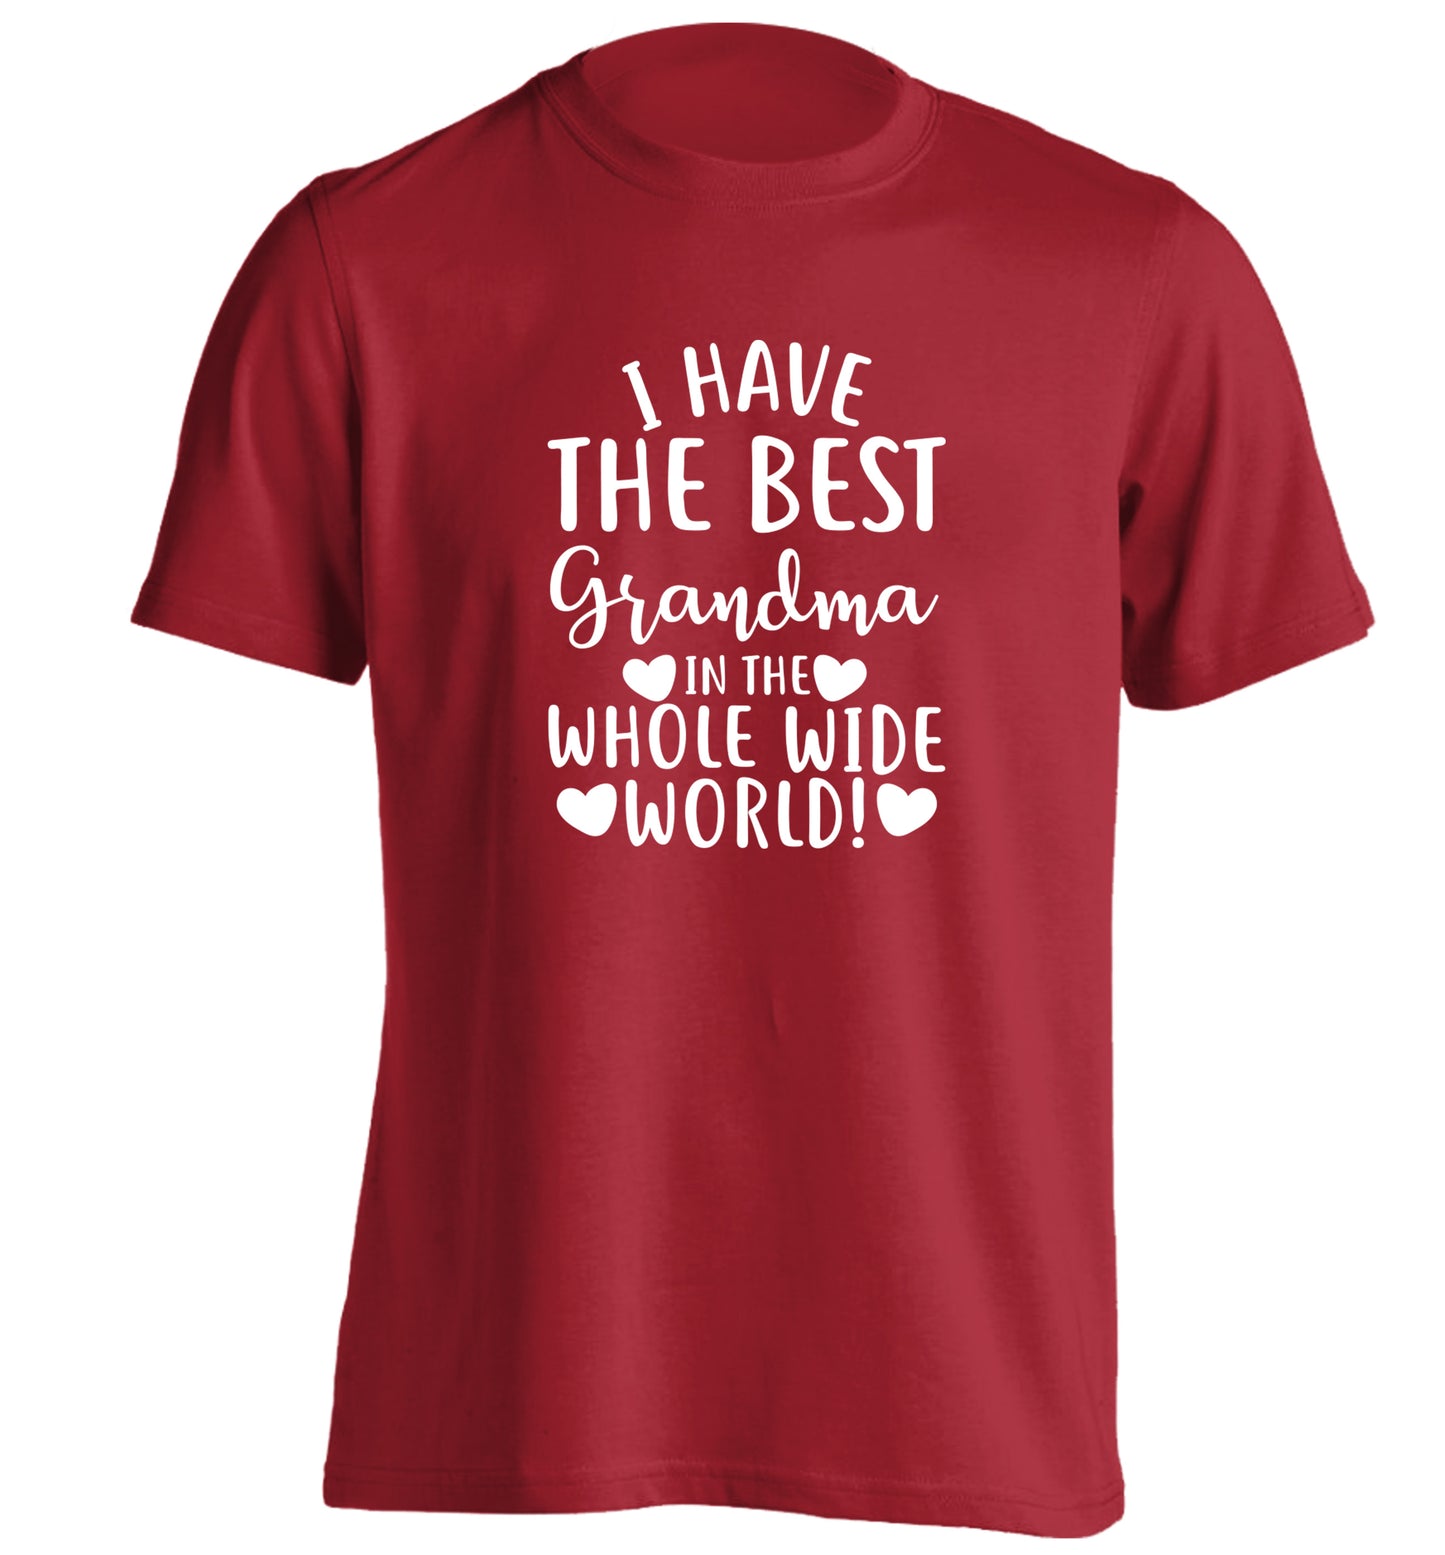 I have the best grandma in the whole wide world! adults unisex red Tshirt 2XL